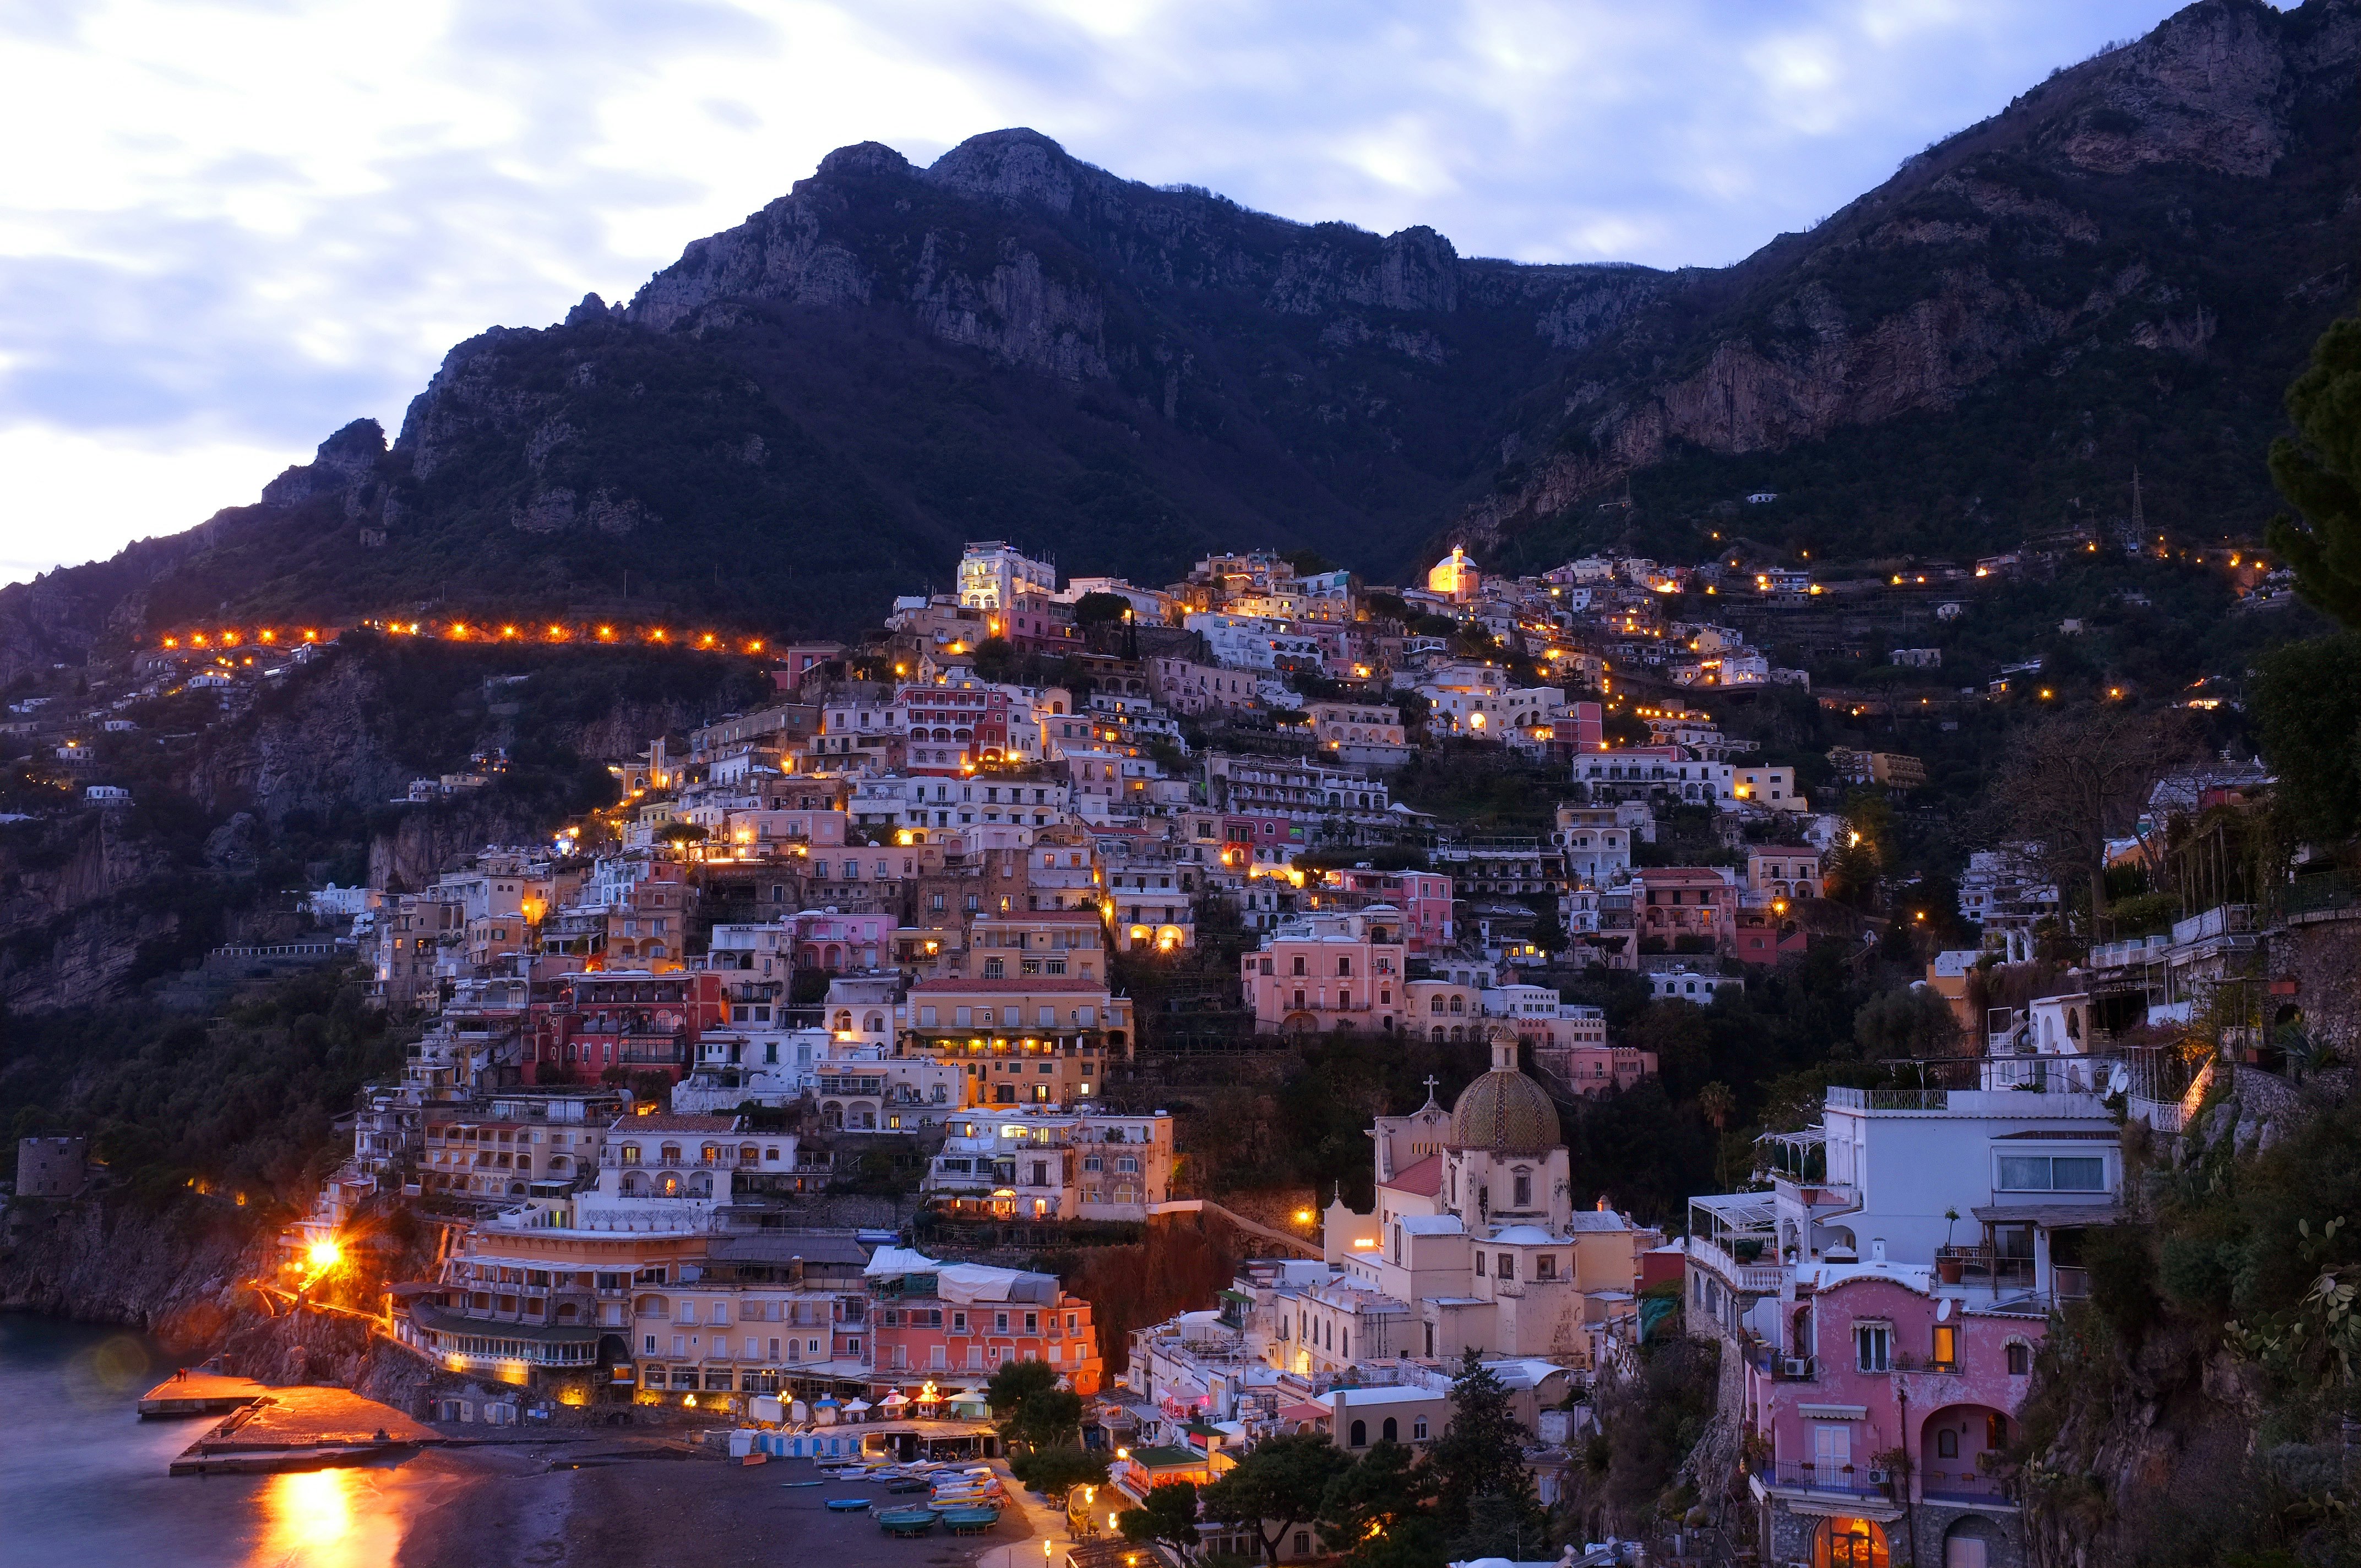 Evening falls on a mountain town